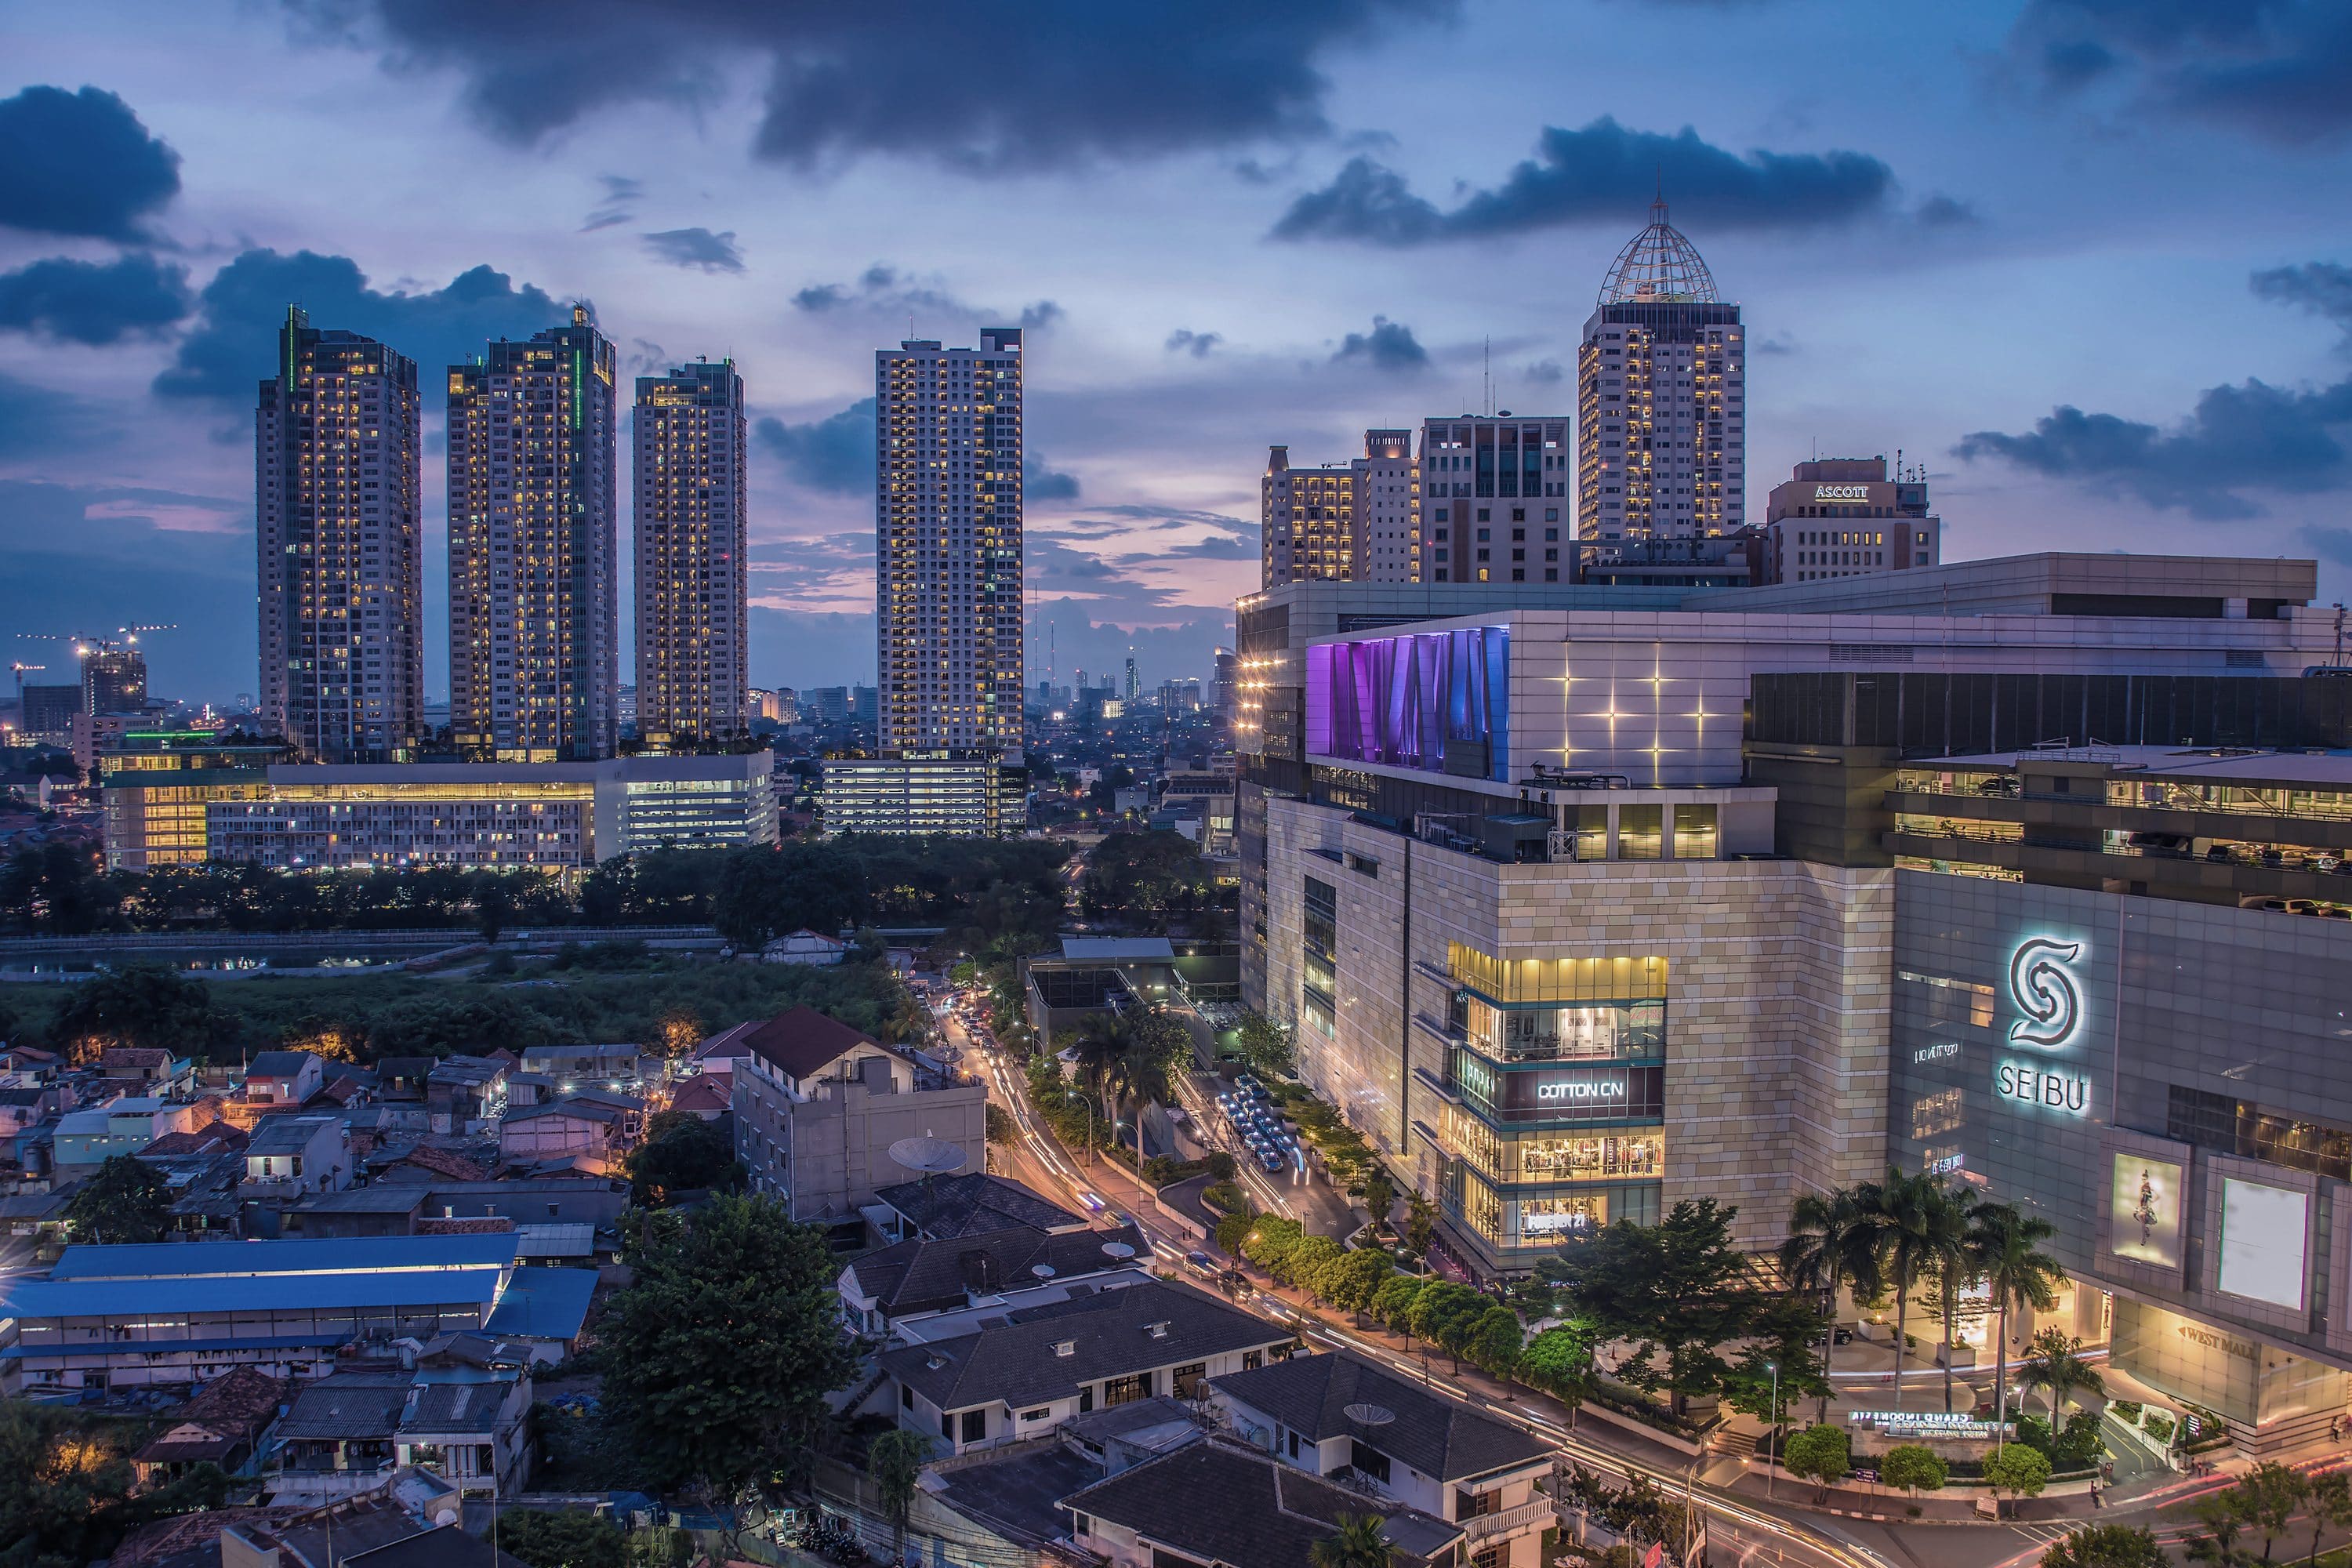 Grand Indonesia shopping centre at night, backdropped by the twinkling skyline